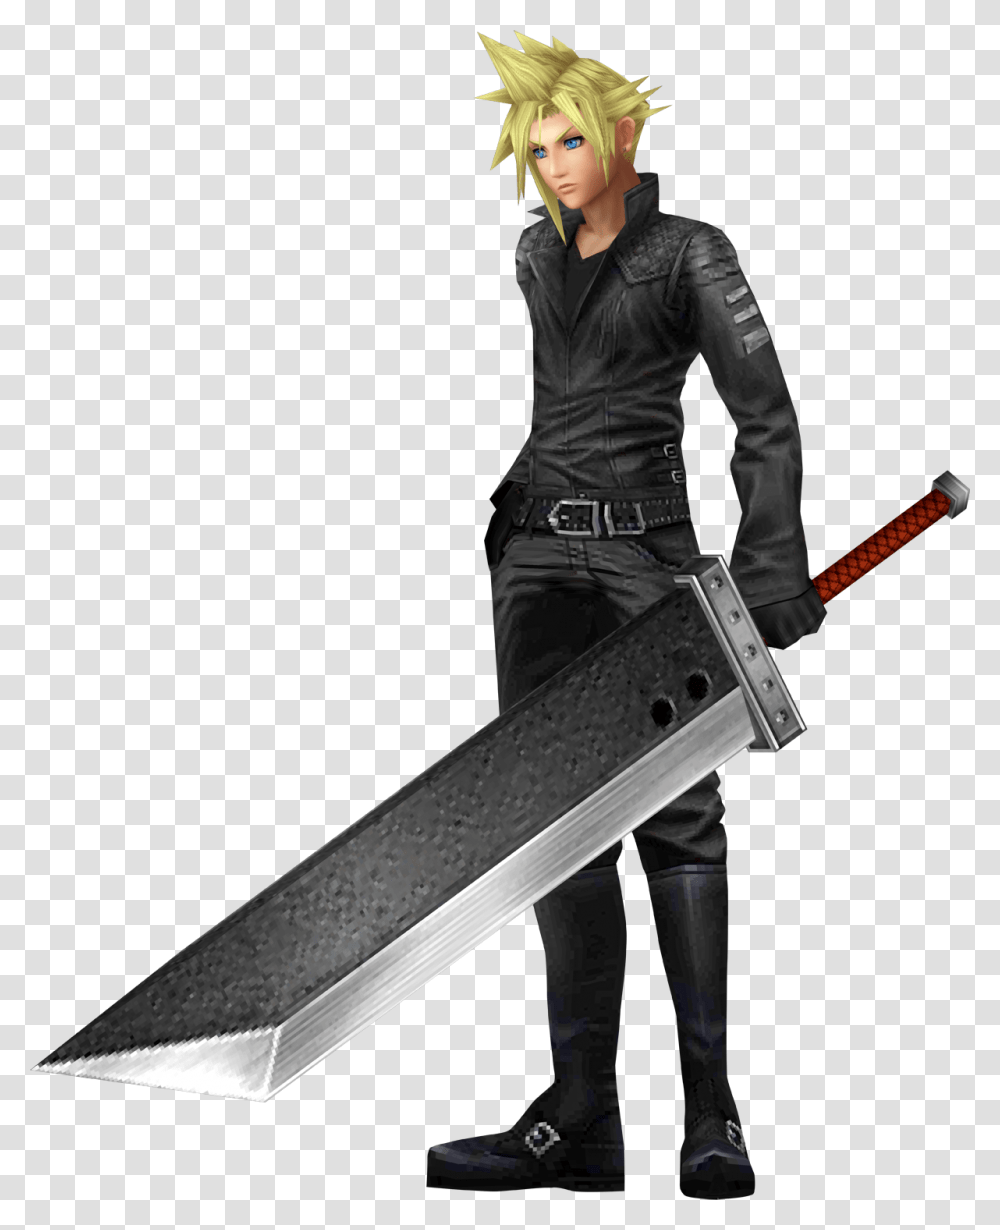 Cloud Strife Hd Image Cloud Strife Background, Person, Human, Weapon, Weaponry Transparent Png